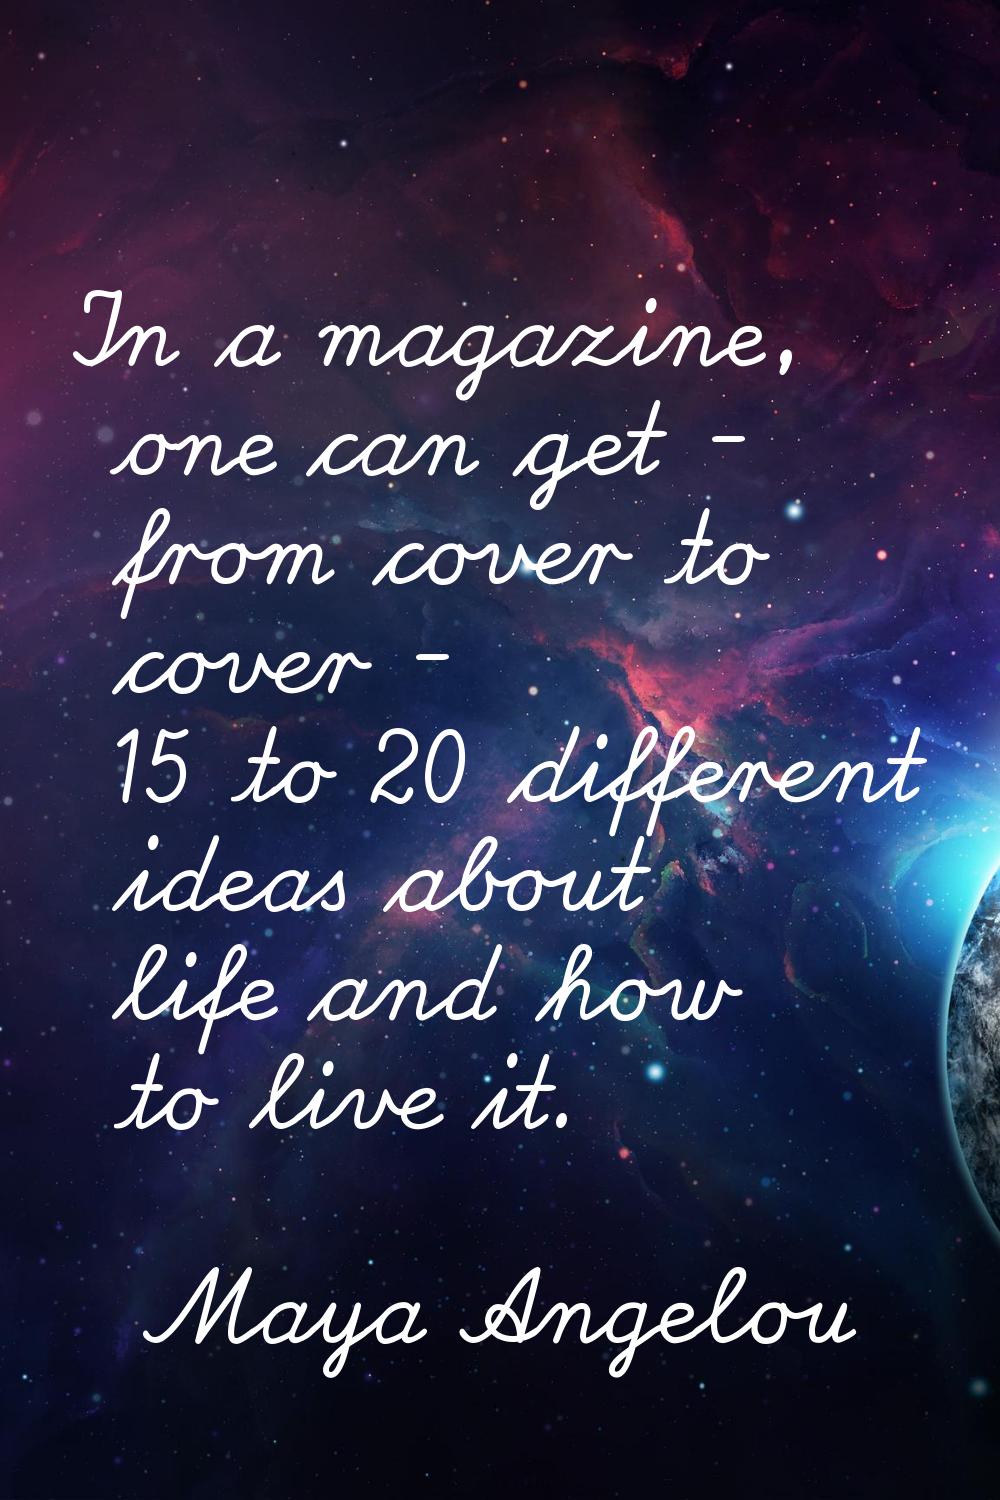 In a magazine, one can get - from cover to cover - 15 to 20 different ideas about life and how to l